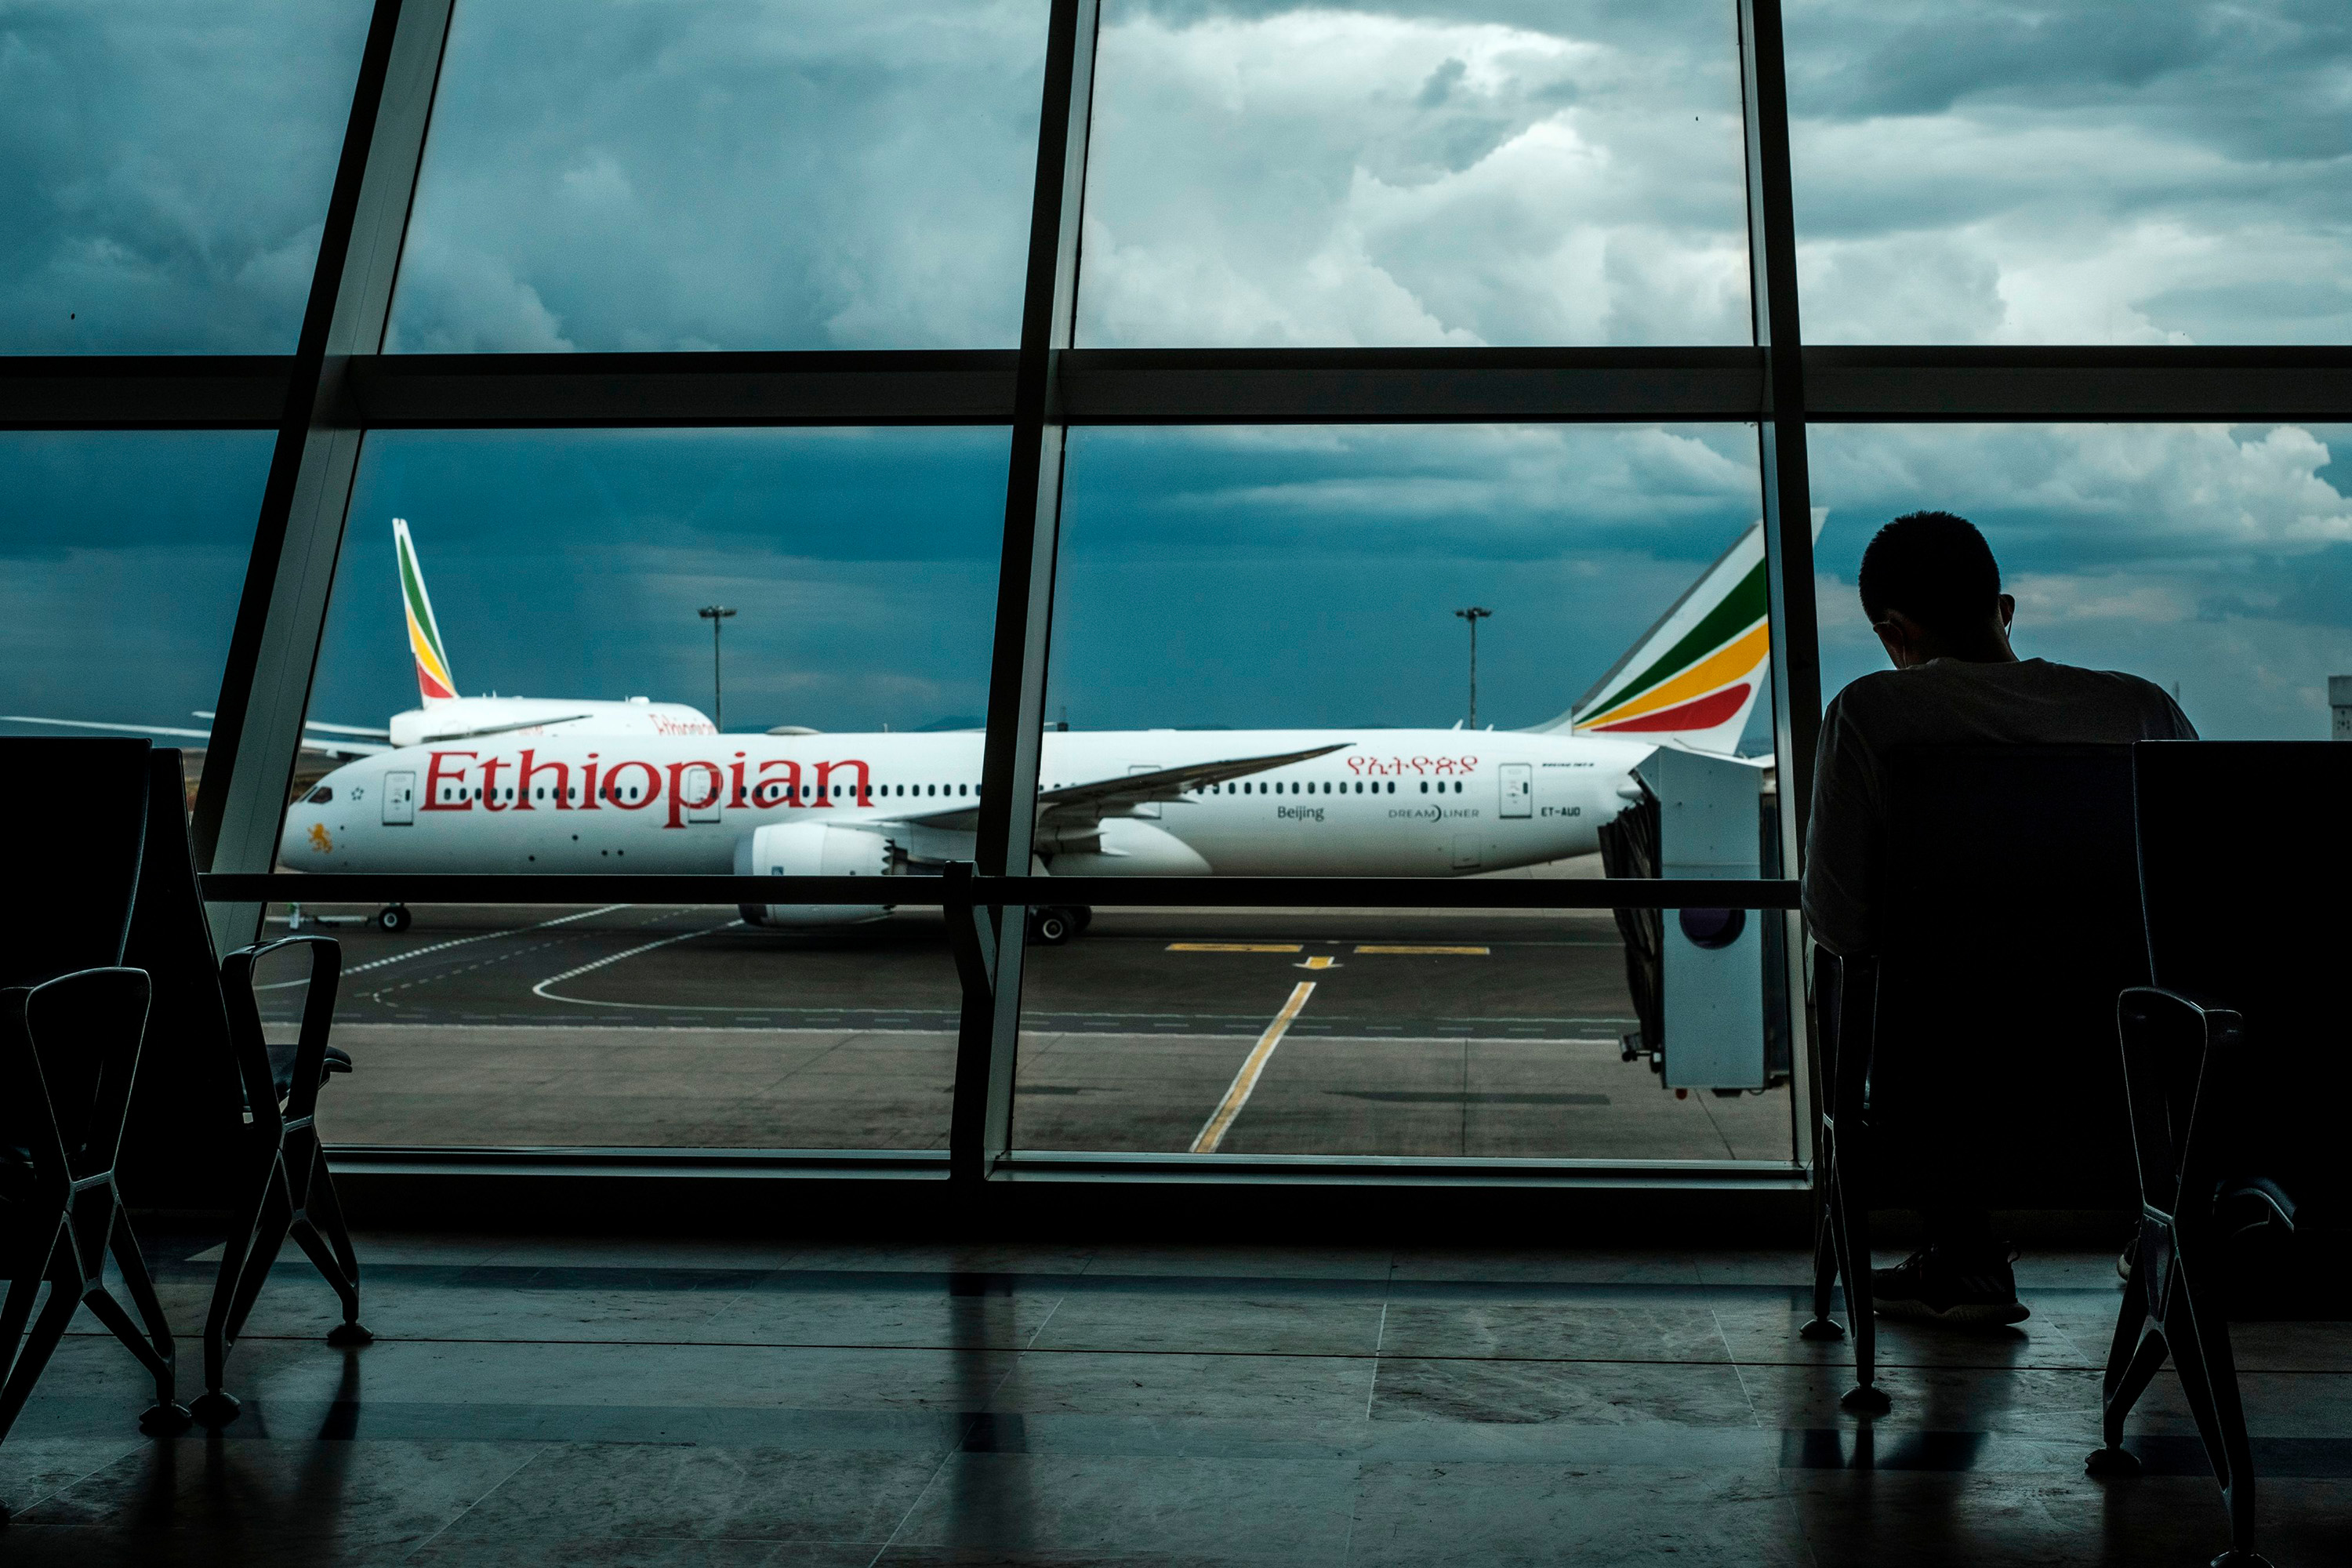 Ethiopian Airlines Plans to Double Fleet to Compete With Gulf Carriers